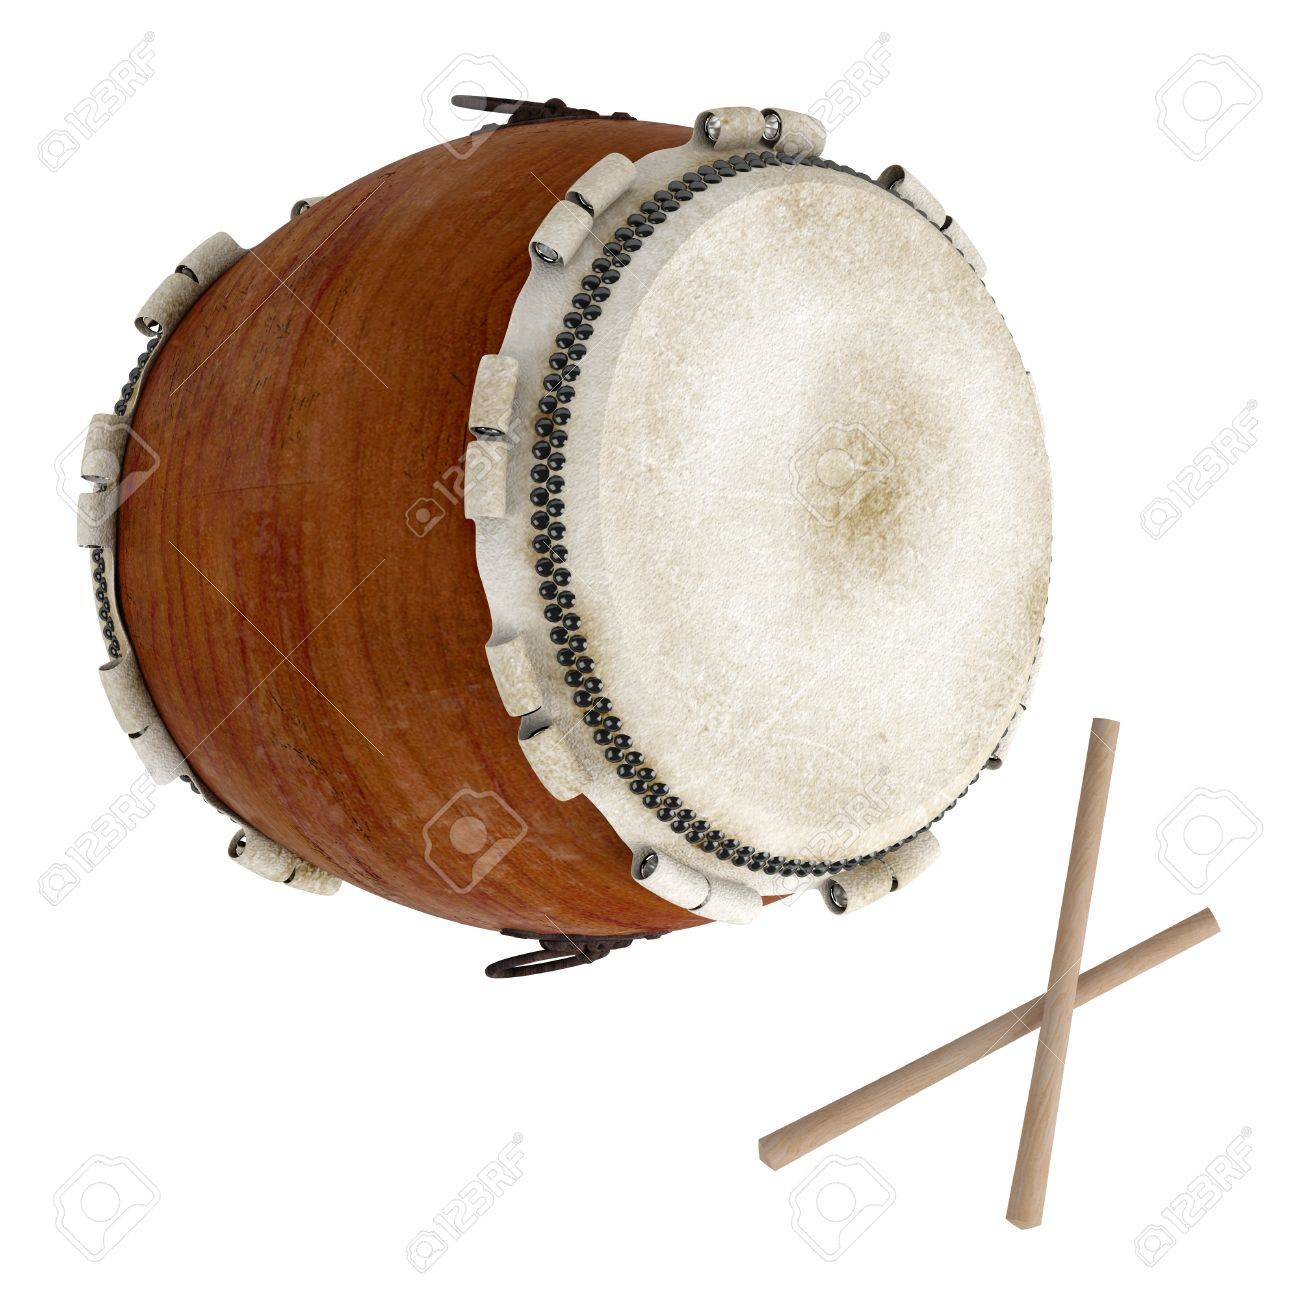 Taiko Isolated On White Background Stock Photo Picture And